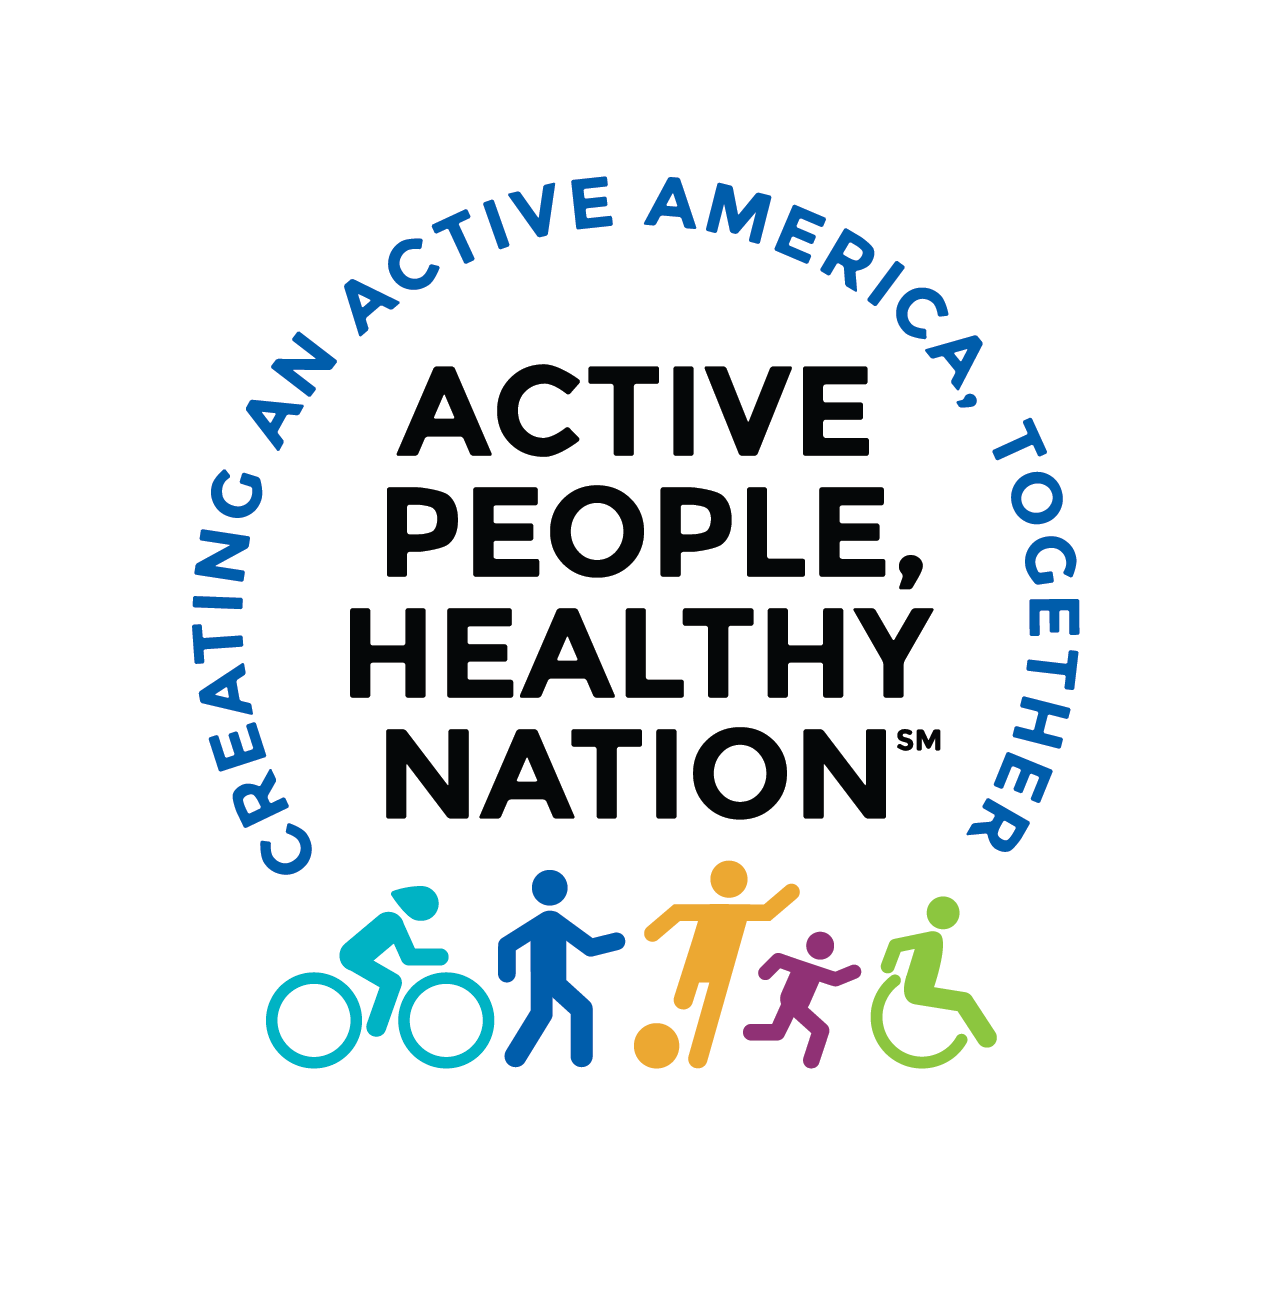 About Active People, Healthy NationSM, Physical Activity